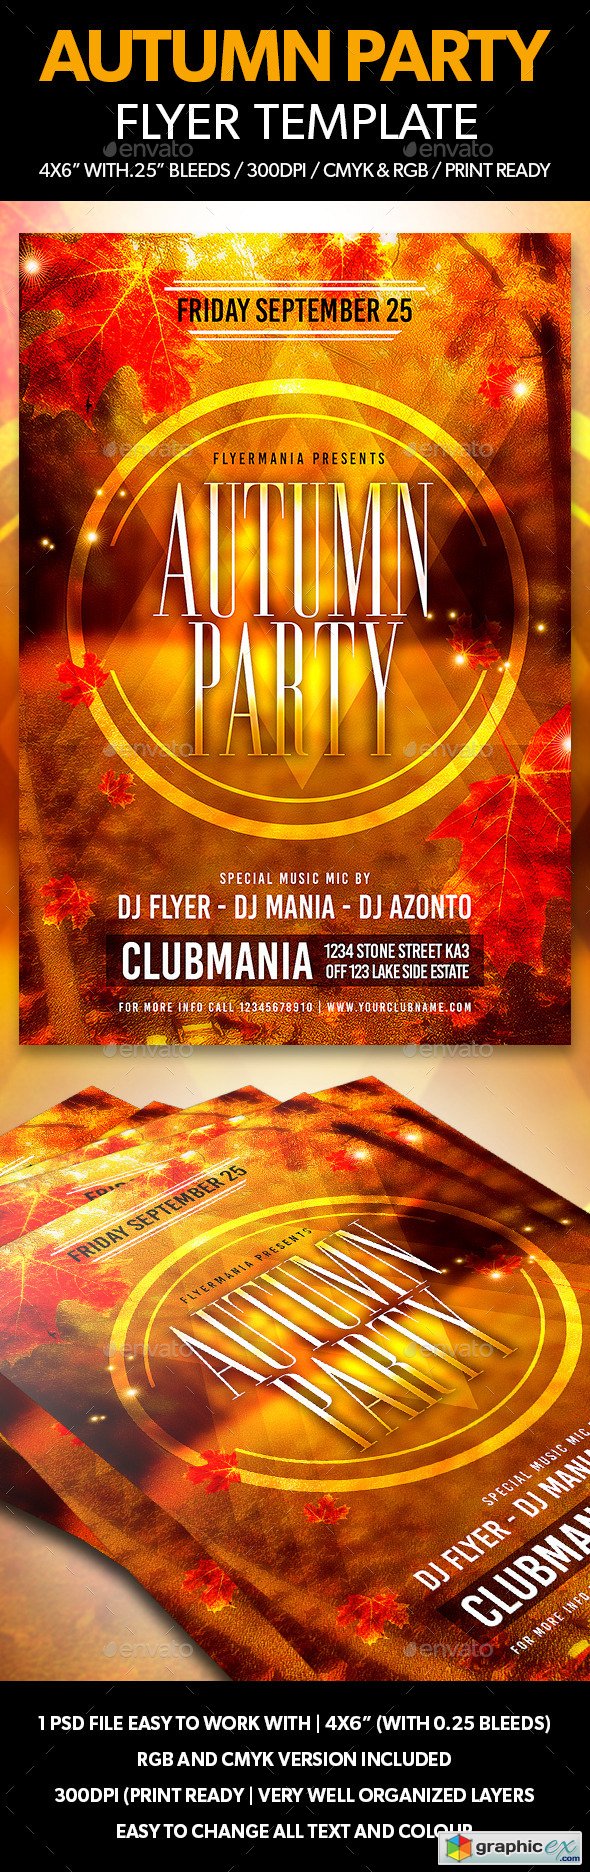 Autumn Party Flyer Template 12716362